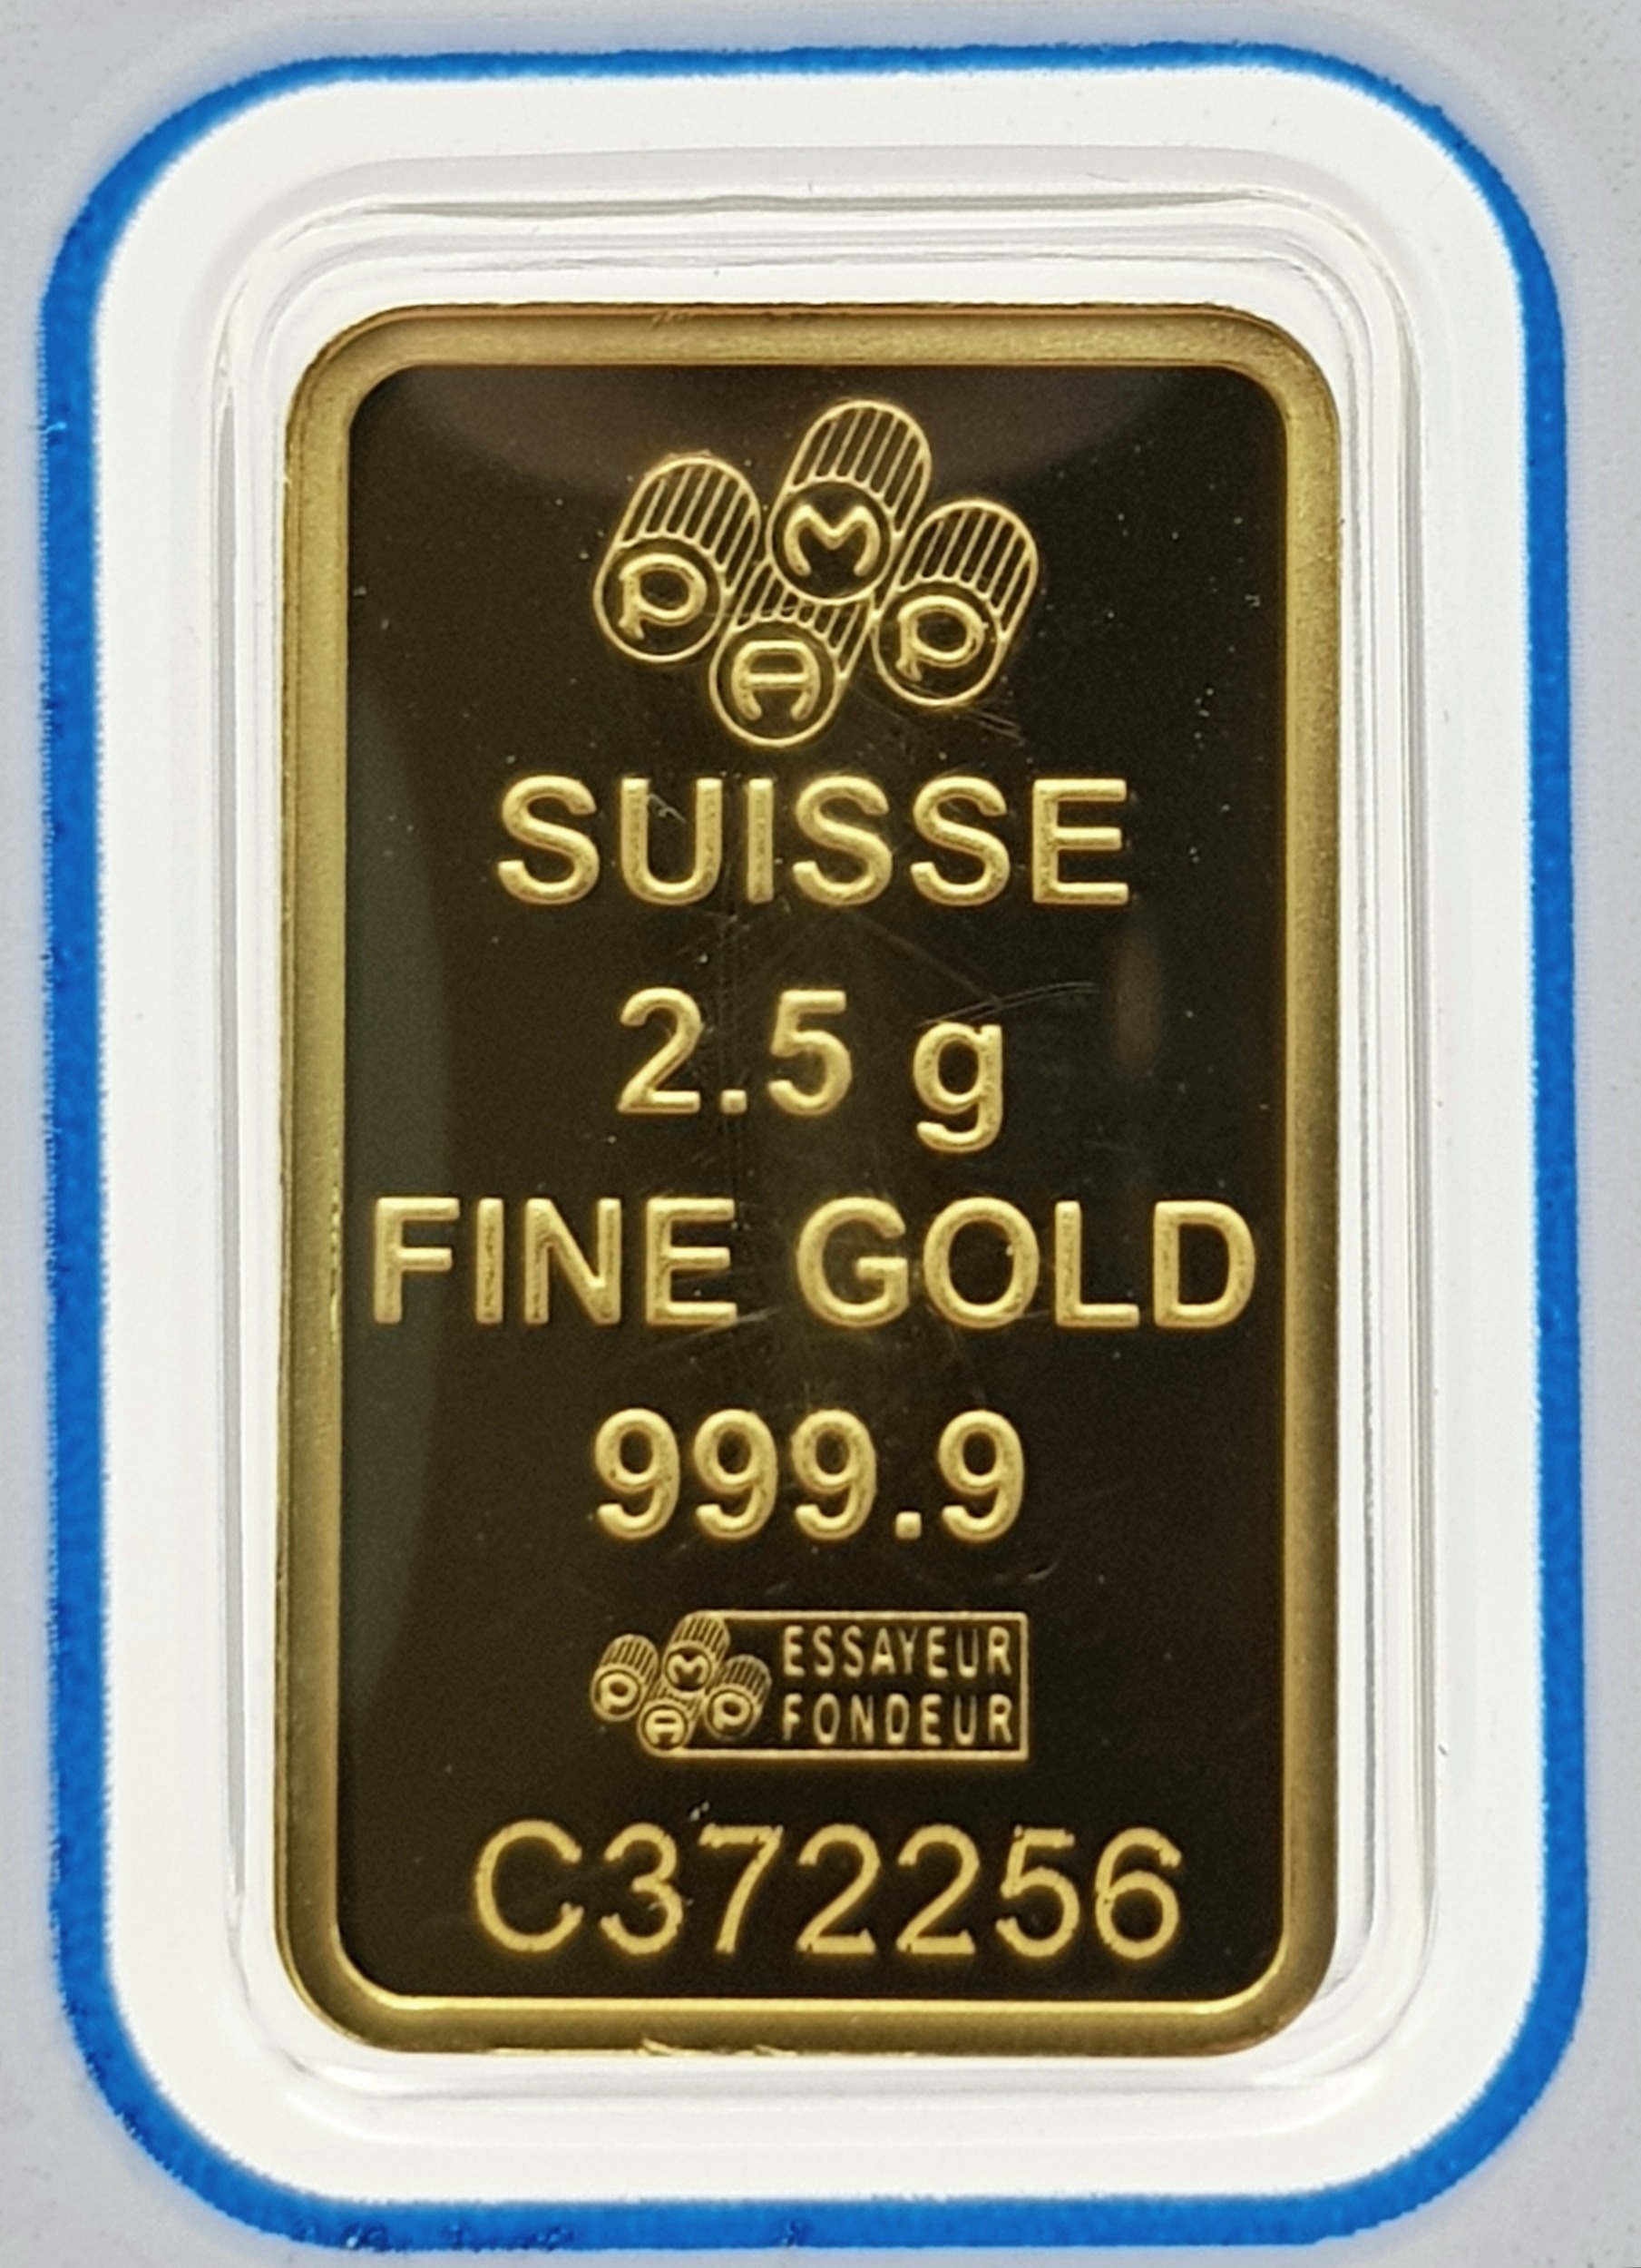 A 2.5g Fine Gold (.999) Swiss Ingot. Comes in a self contained package. - Image 6 of 7